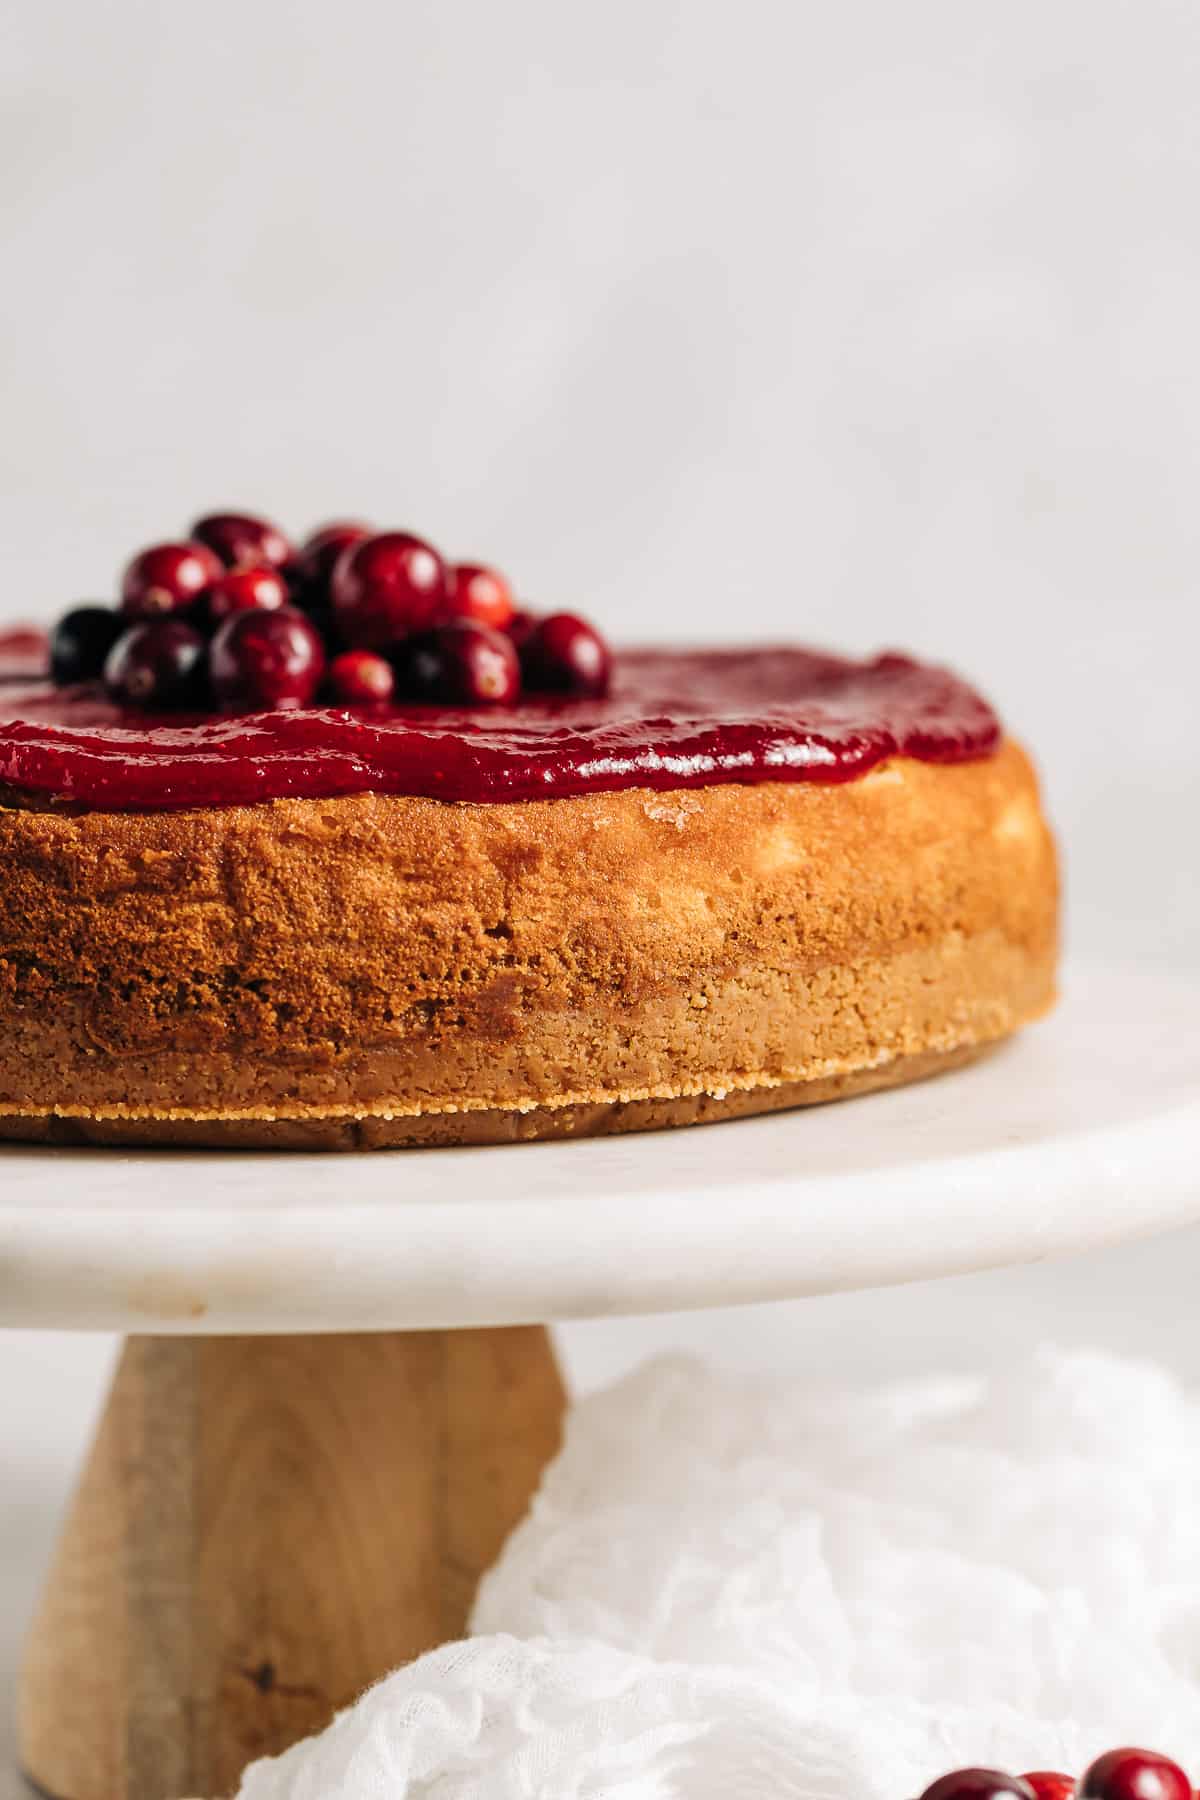 white chocolate cheesecake with cranberry topping on a cake stand.